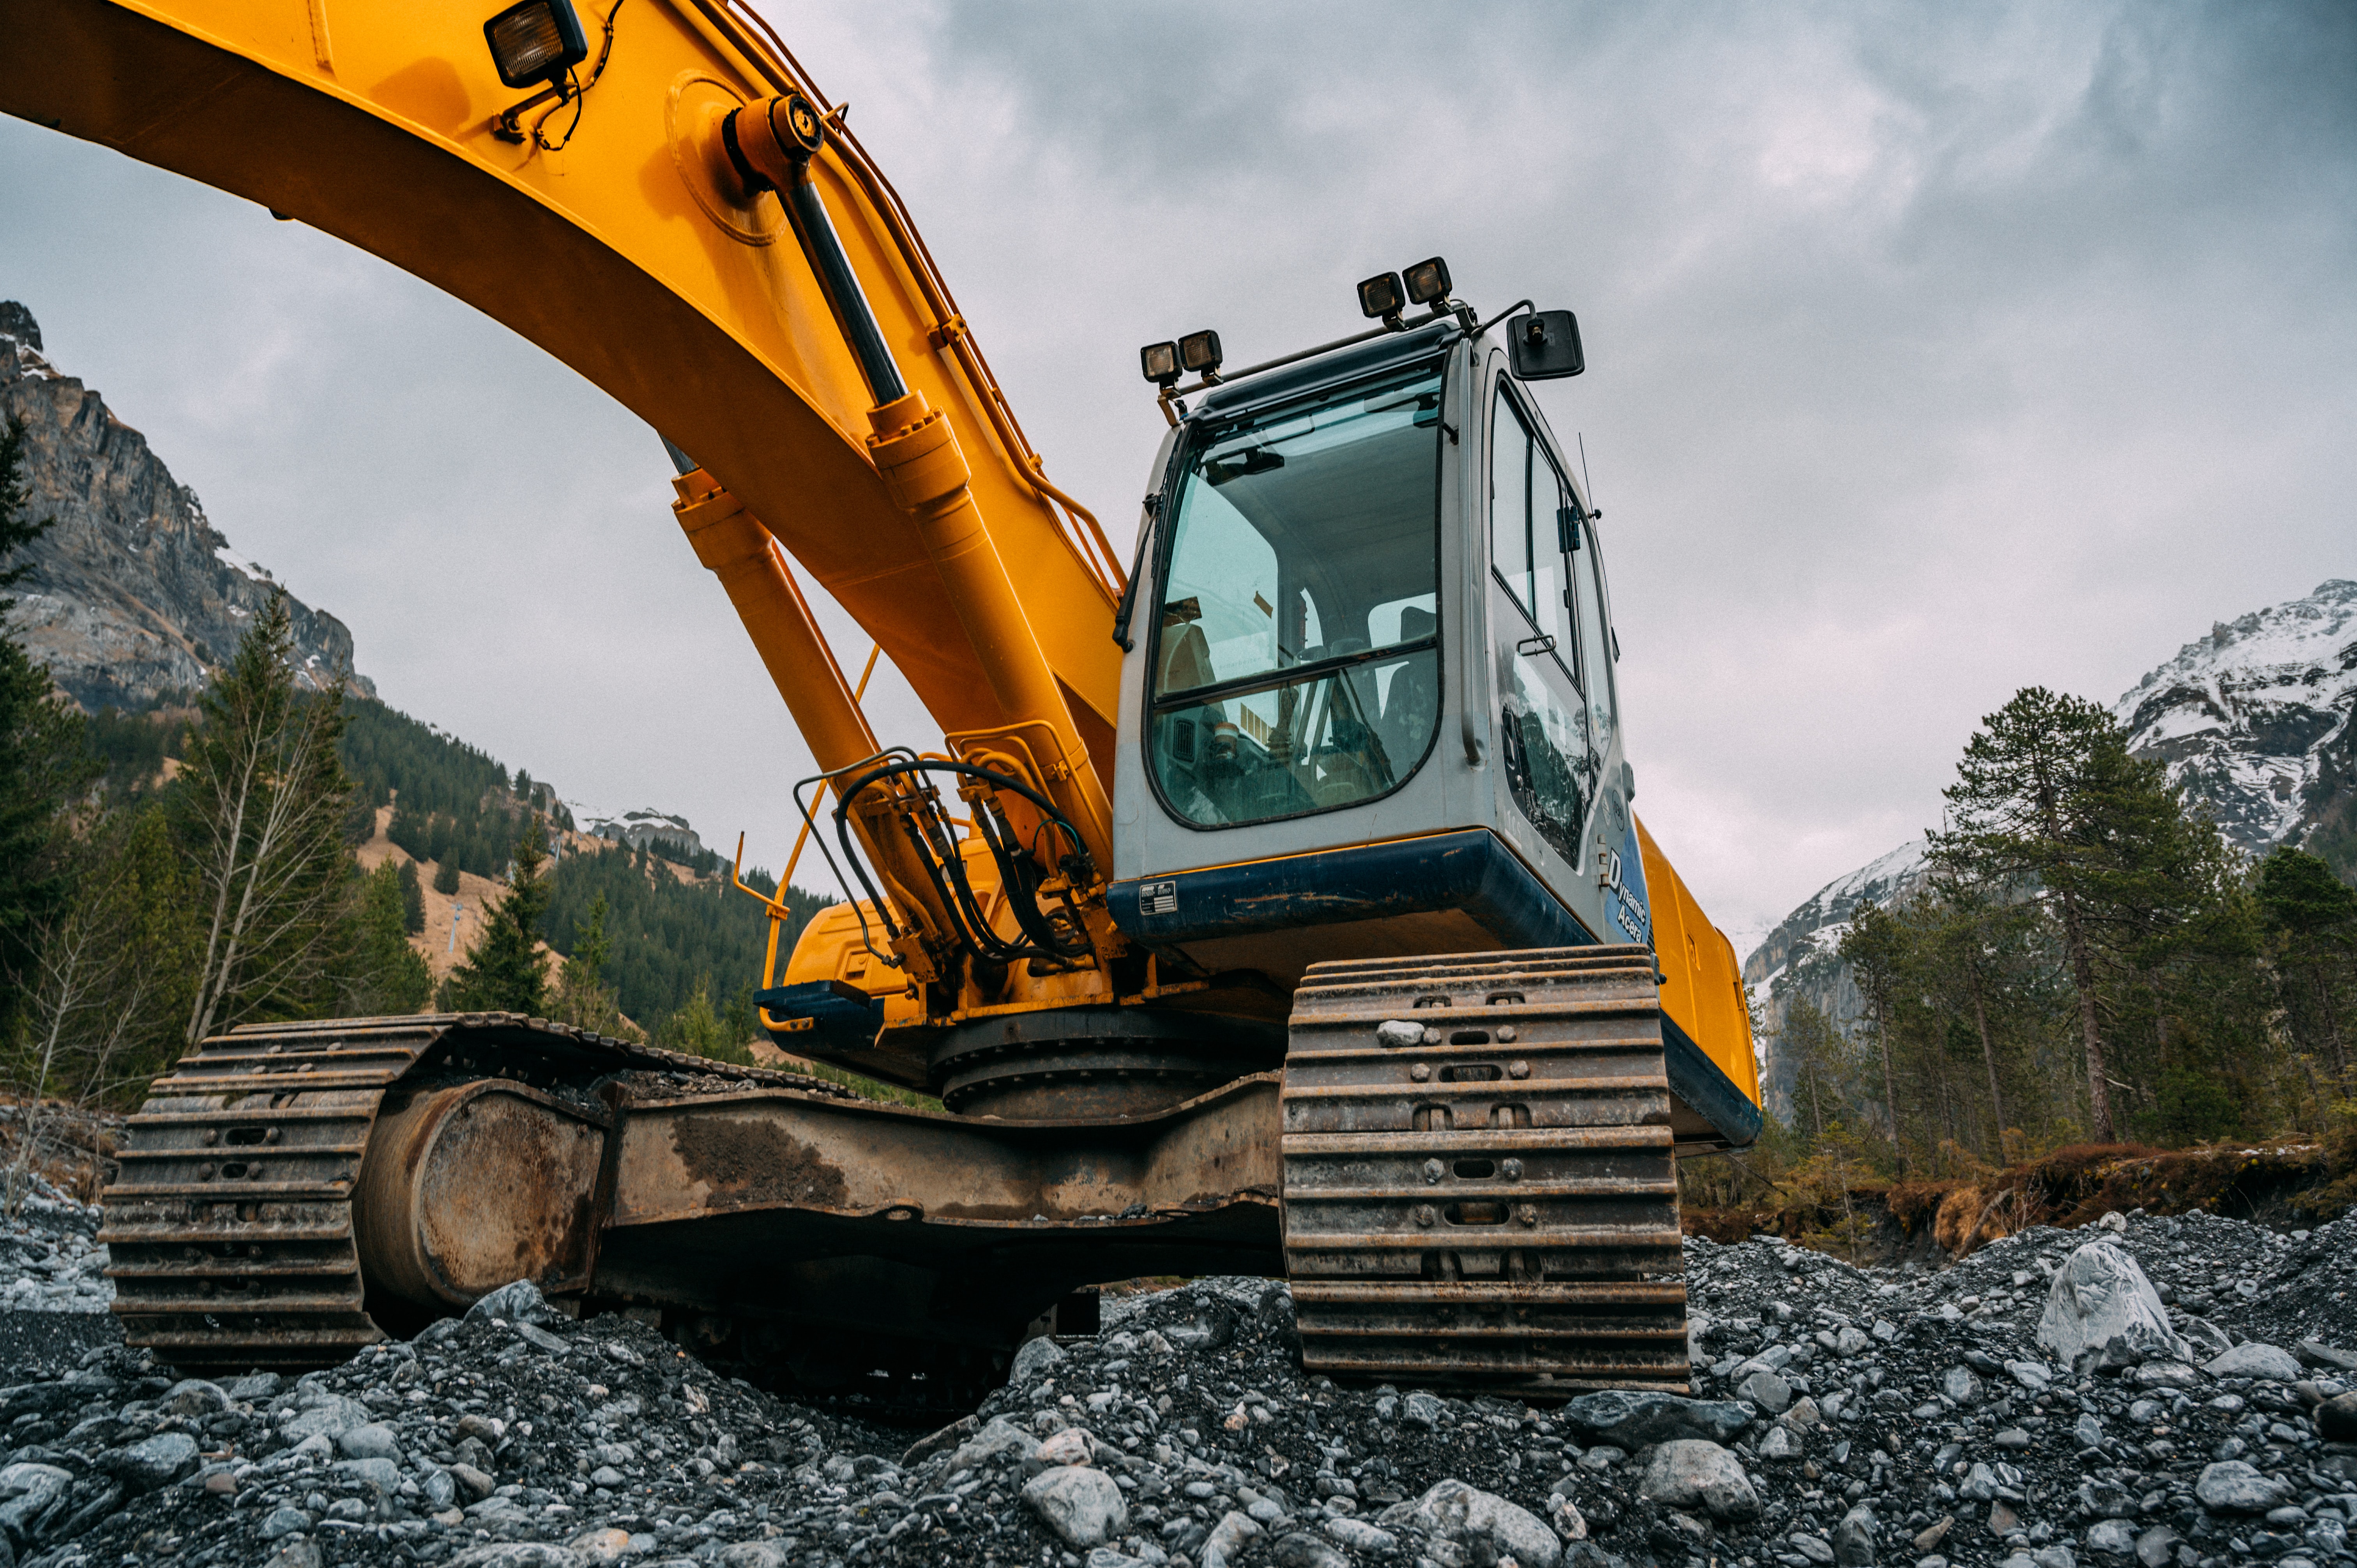 Yellow excavator in front of a forested mountain scene